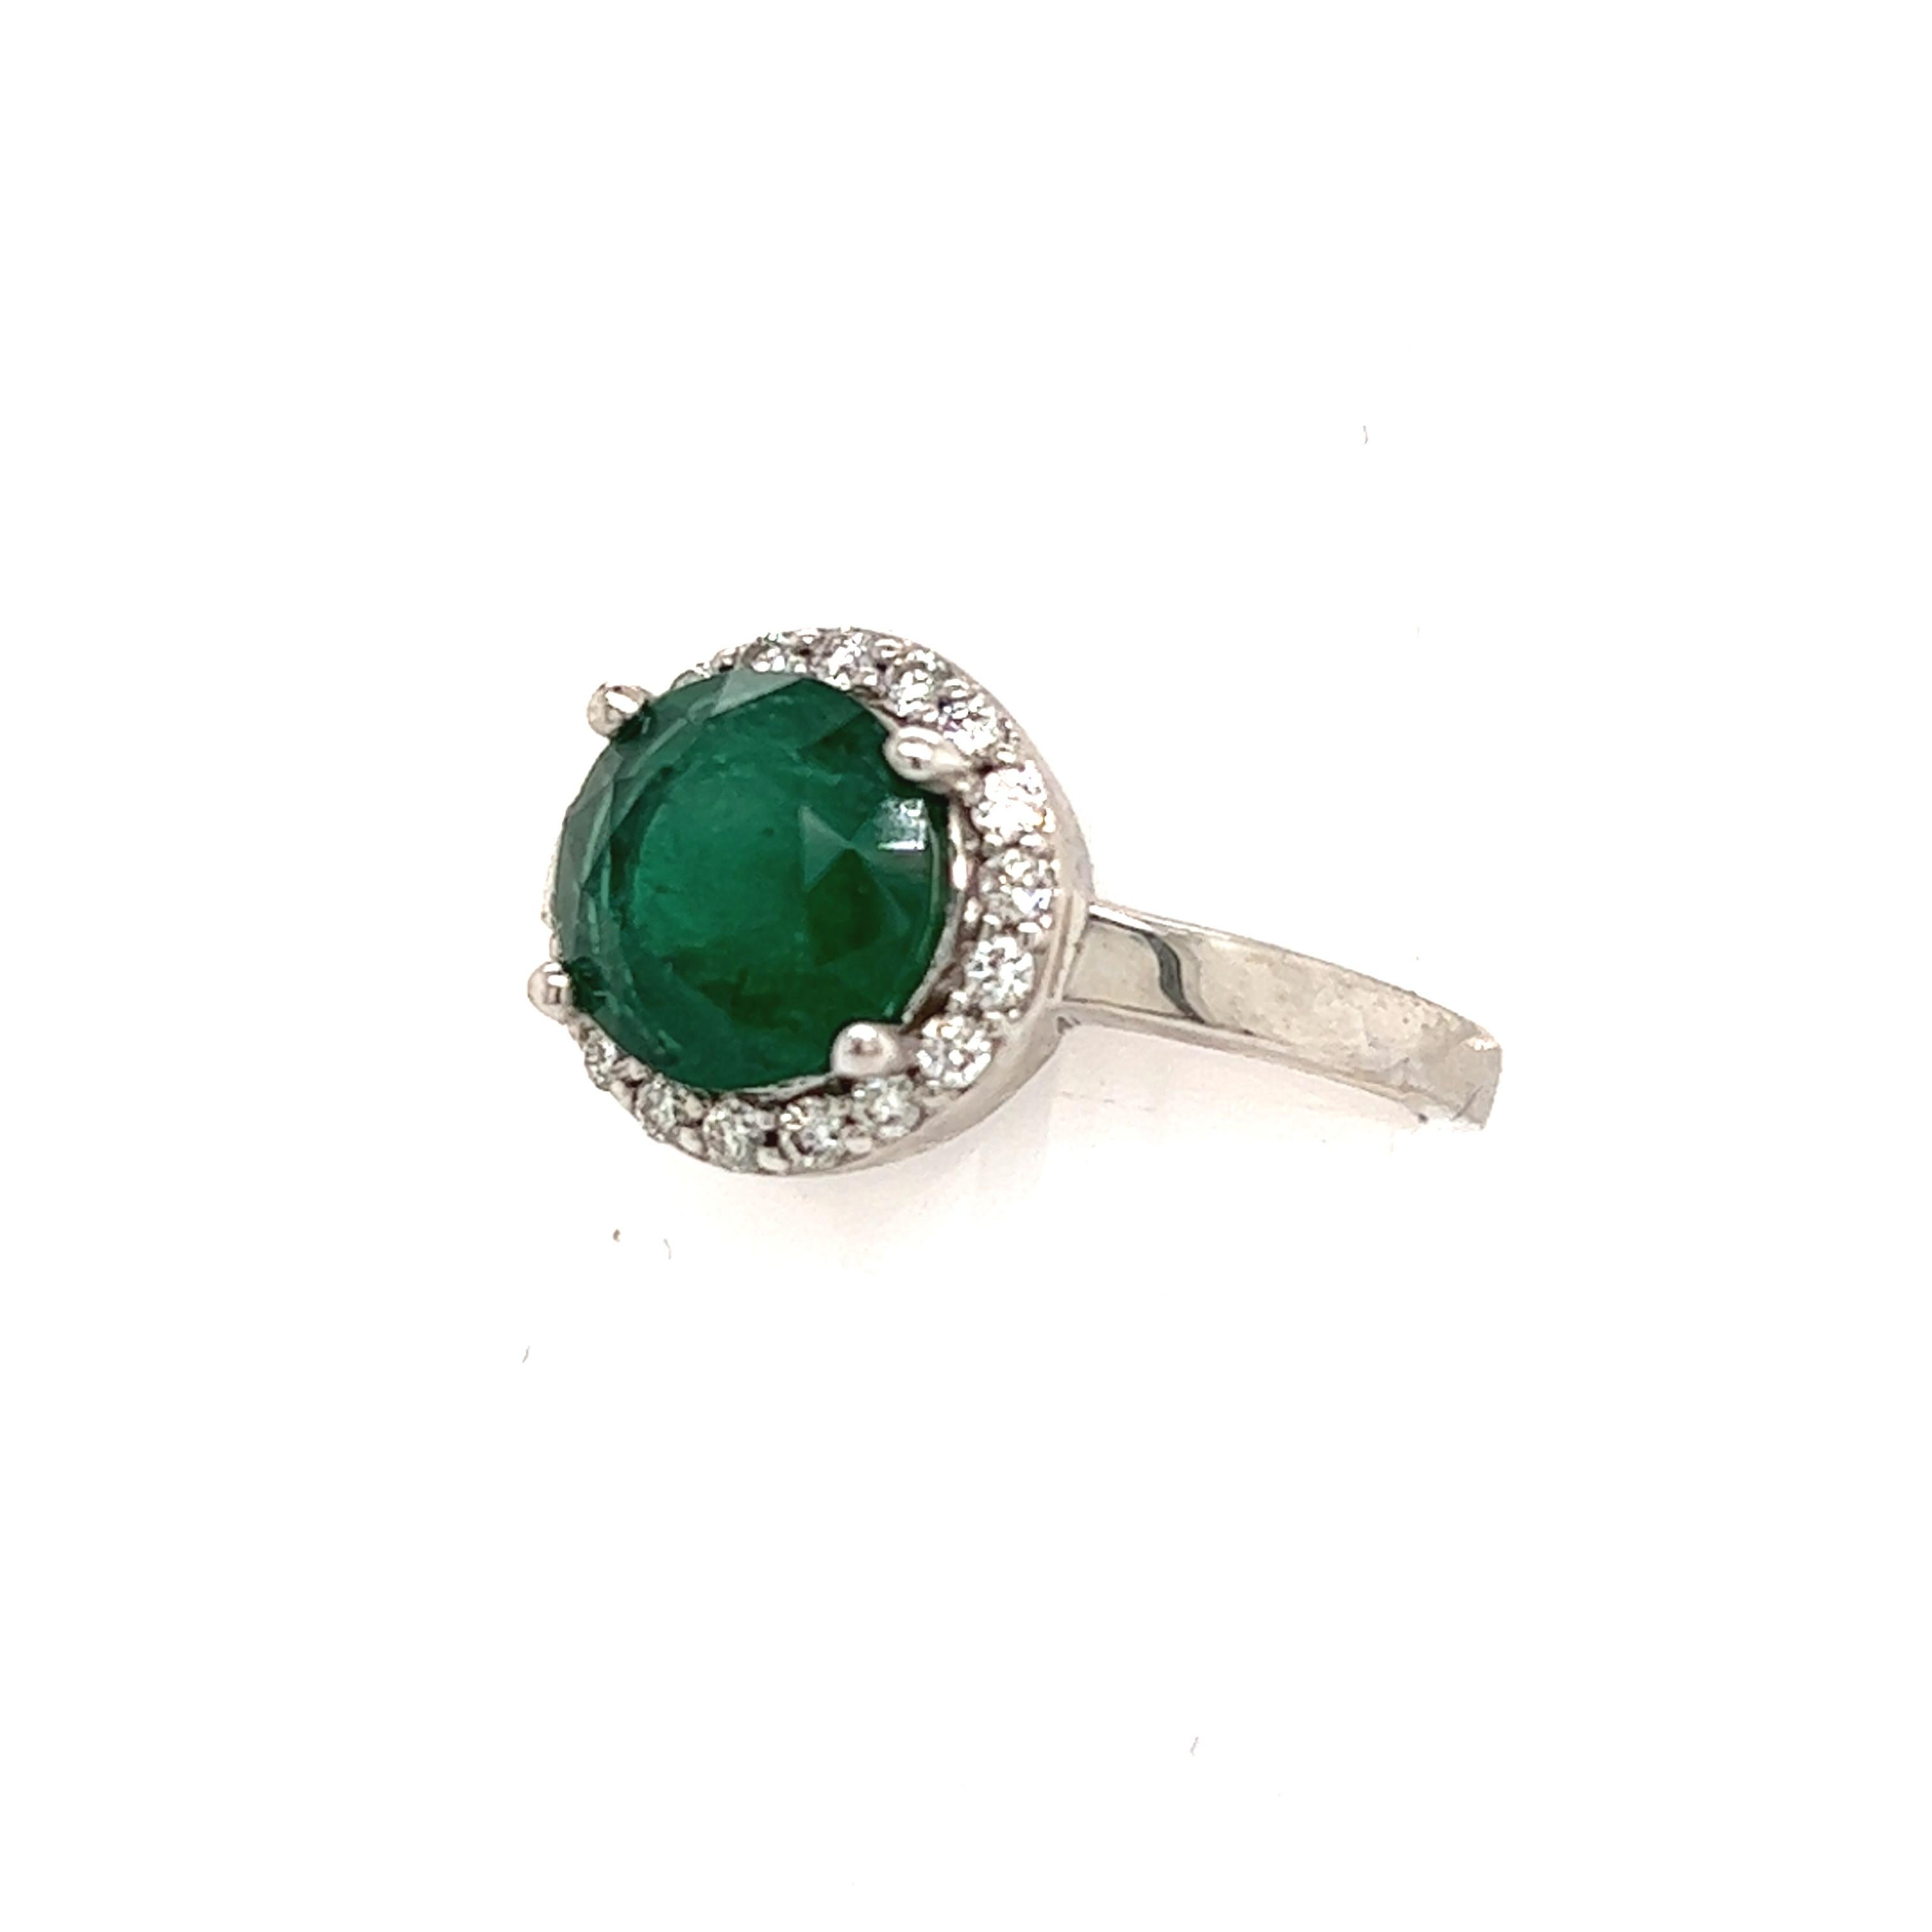 Round Cut Natural Emerald Diamond Ring 14k Gold 2.83 TCW Certified For Sale